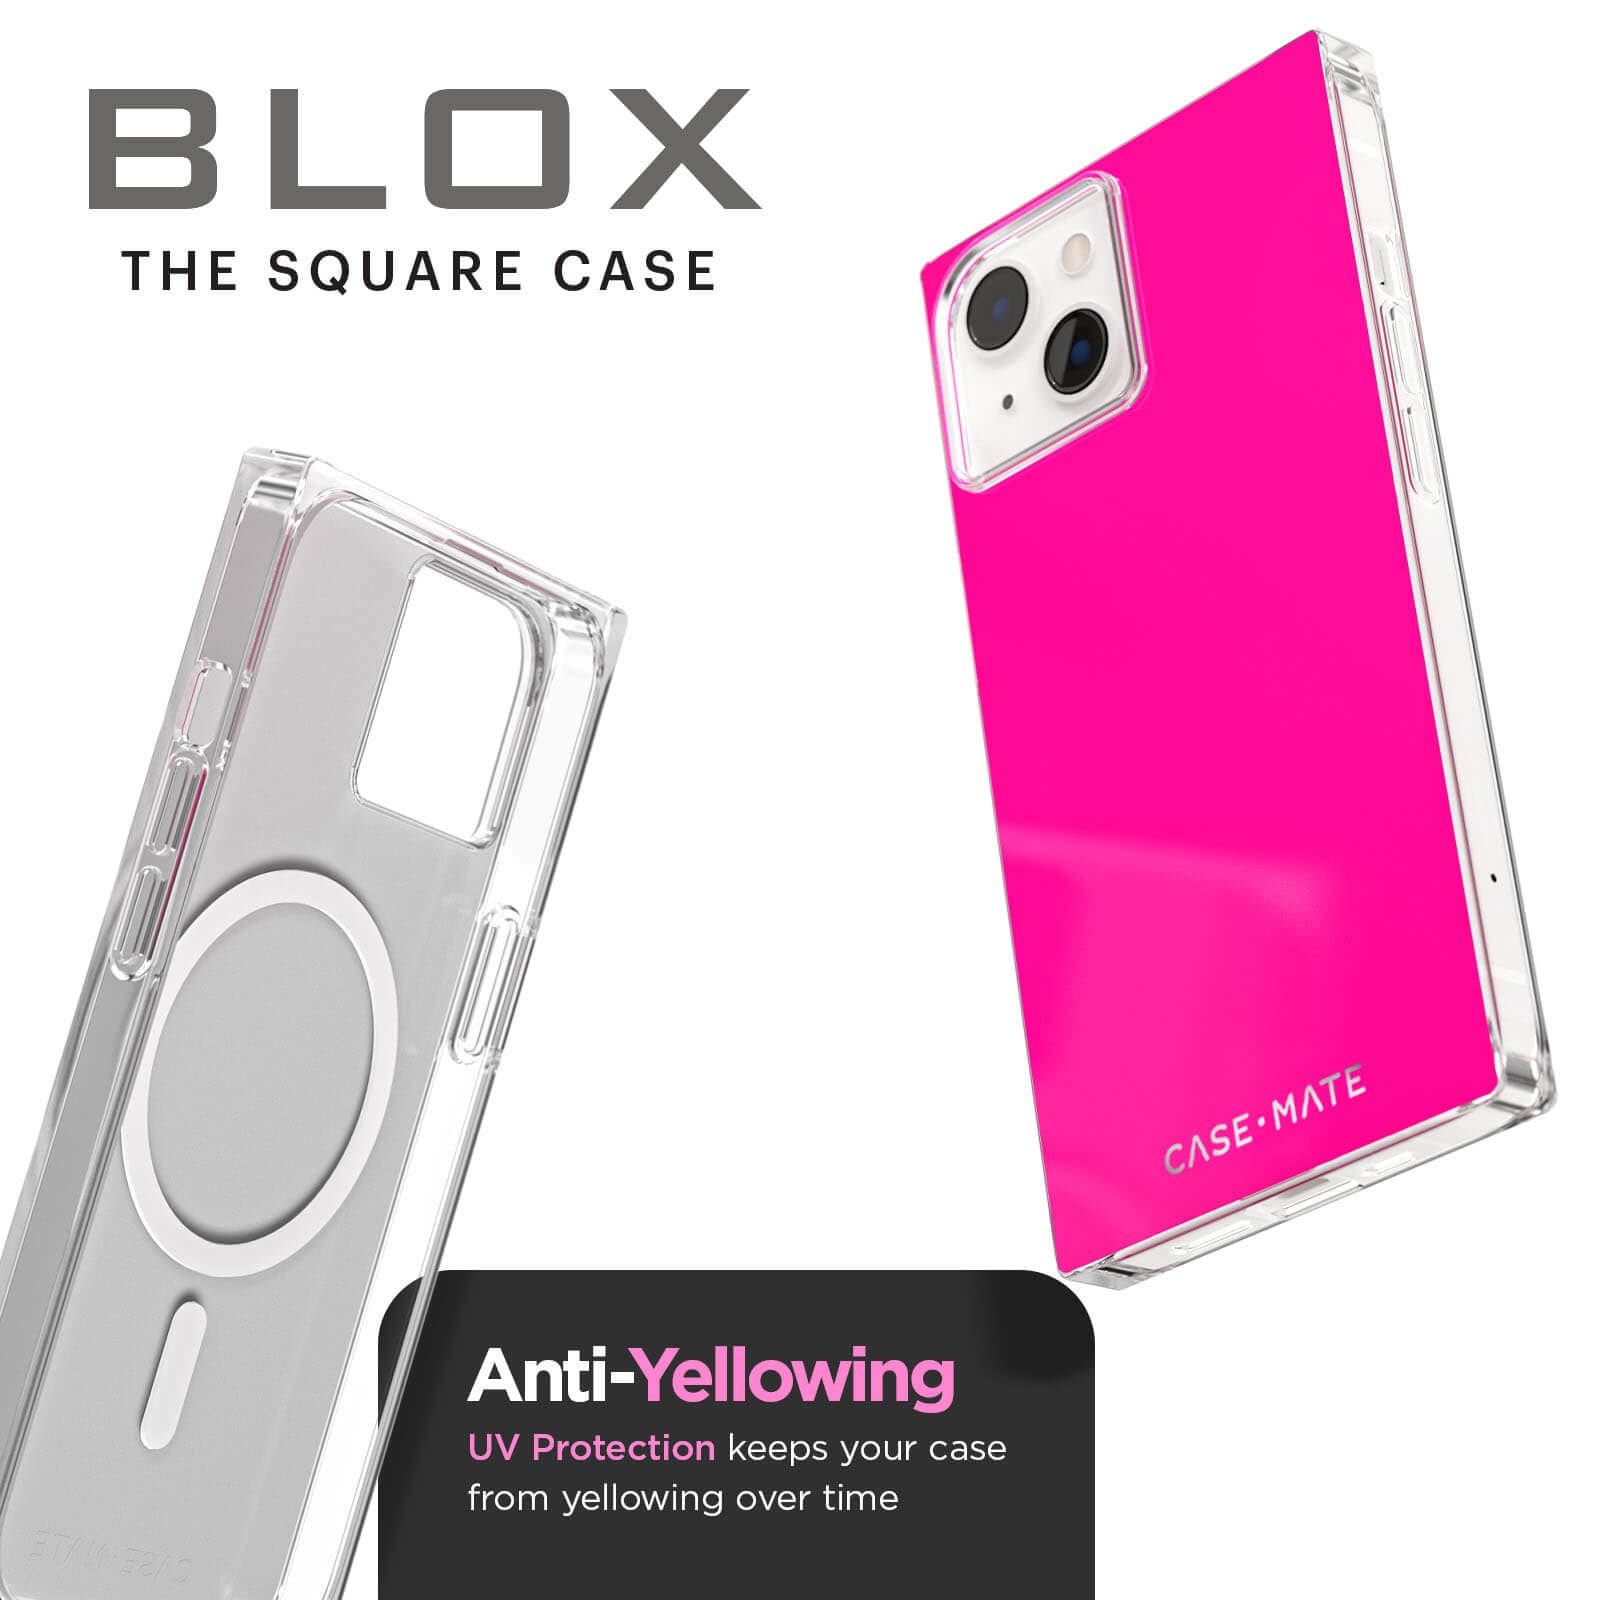 BLOX The Square Case. Anti-yellowing uv protection keeps your case from yellowing over time. color::Hot Pink